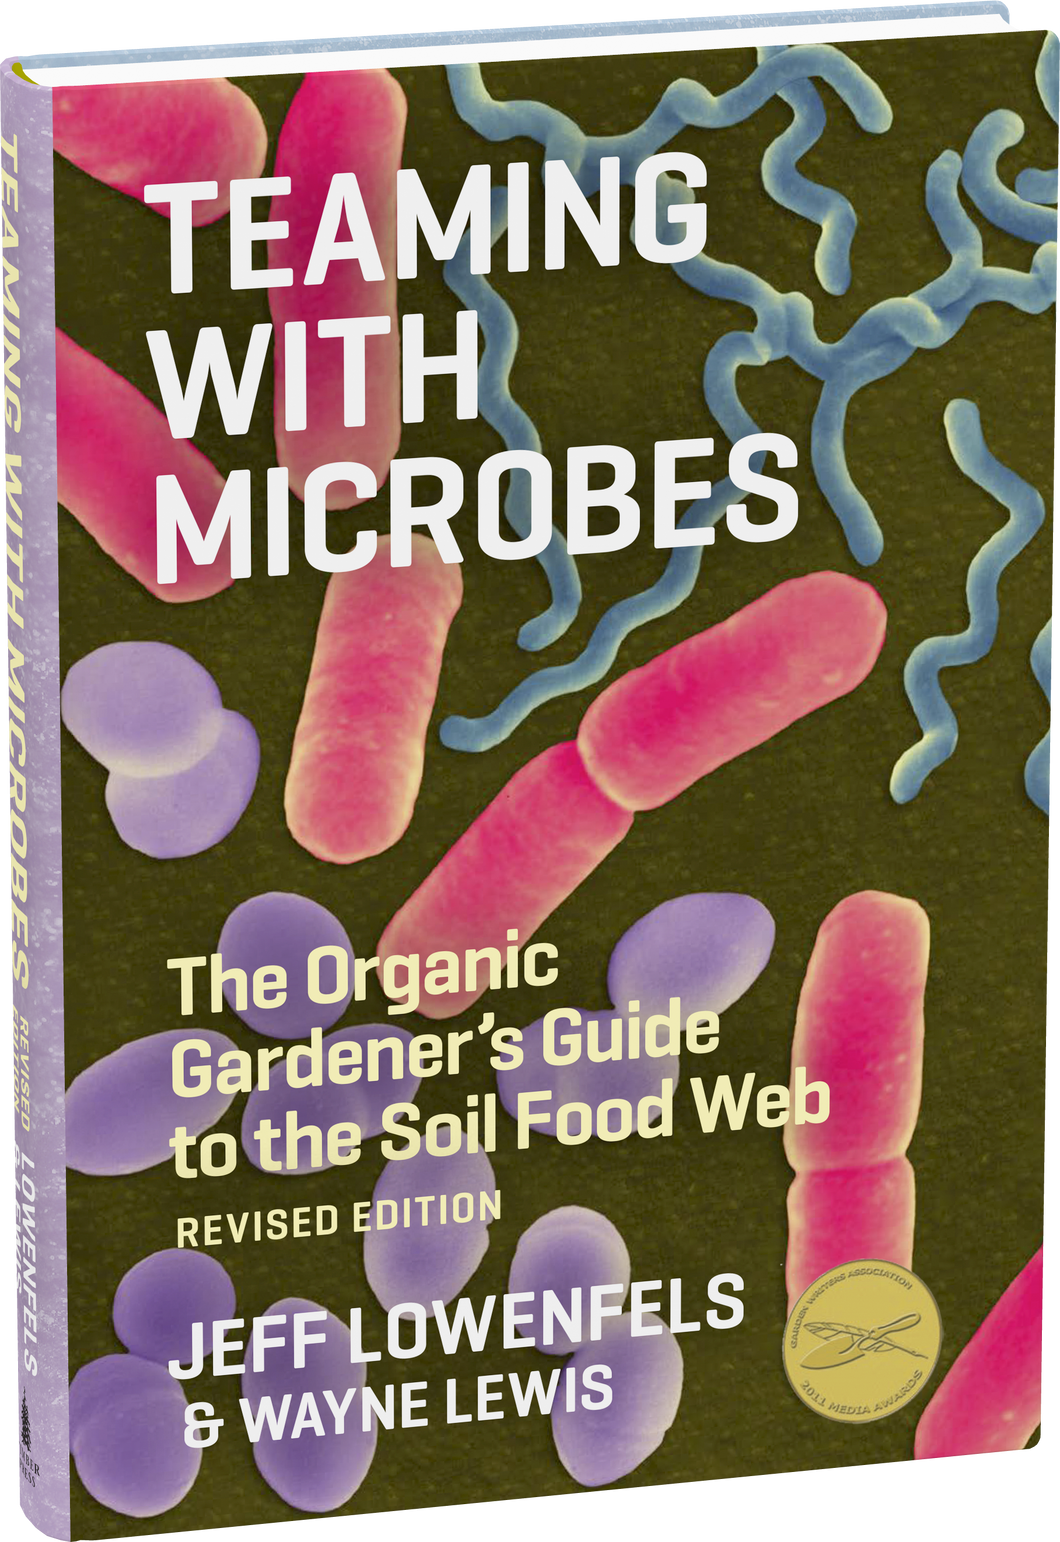 Teaming with Microbes The Organic Gardener's Guide to the Soil Food Web, Revised Edition